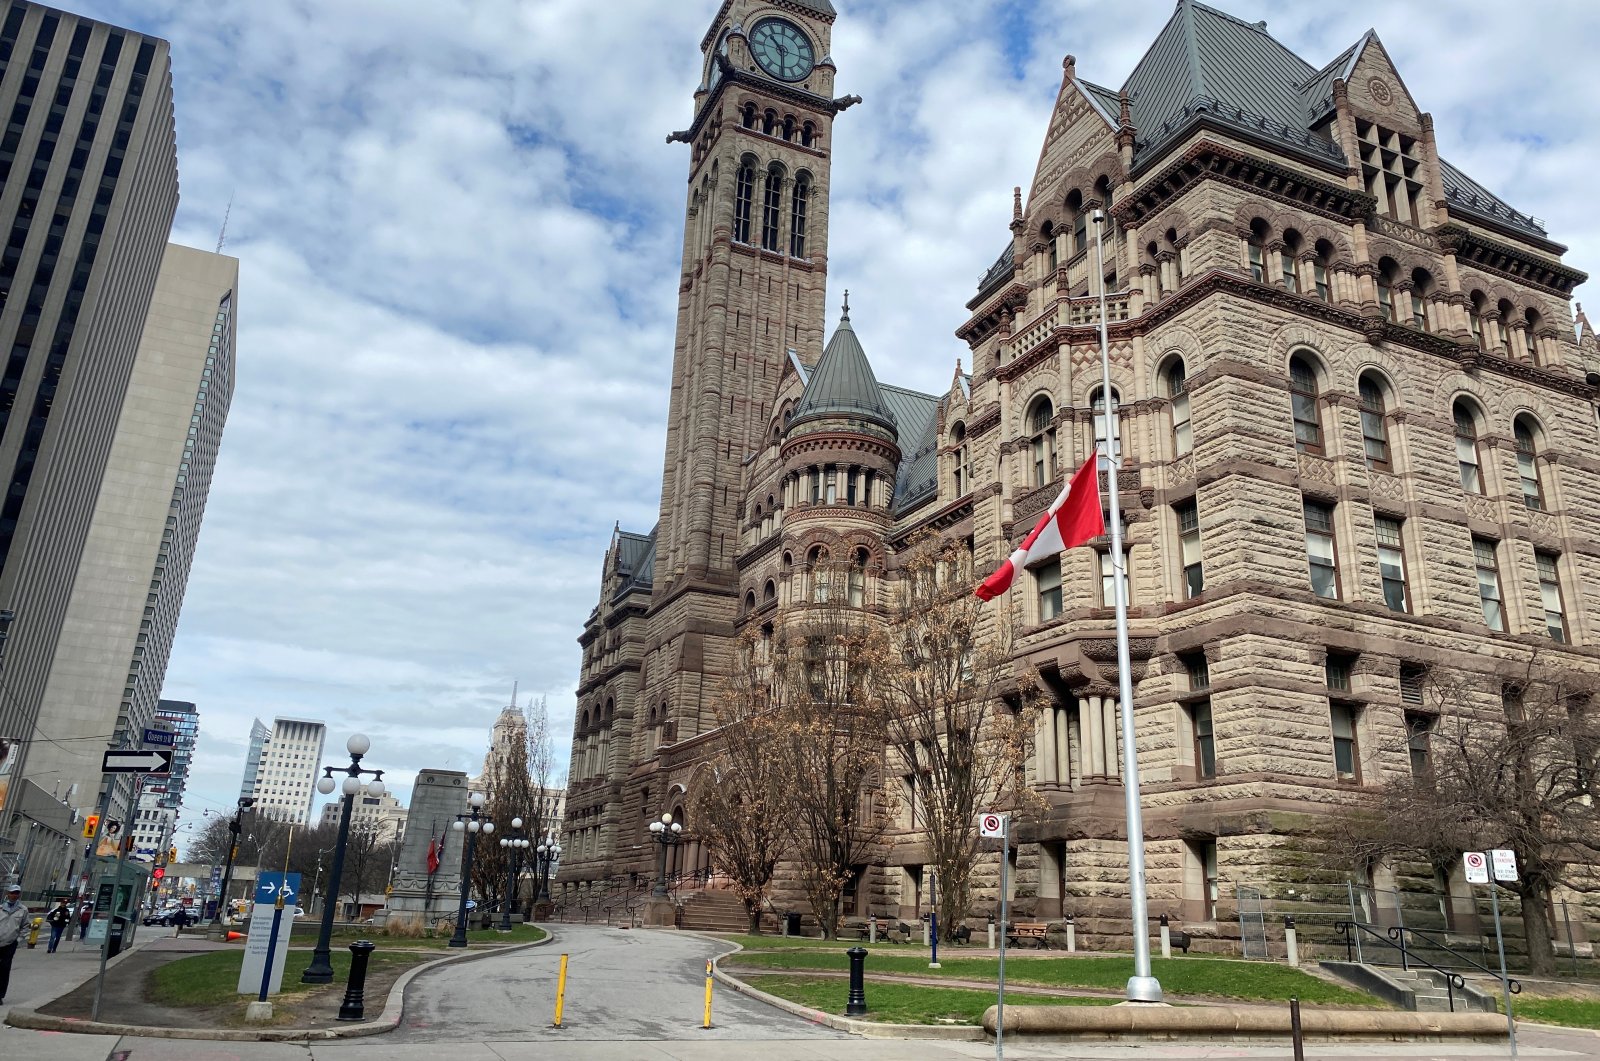 A Canadian flag flies at half-mast outside Old City Hall in Toronto after Britain's Prince Philip died at the age of 99. Toronto, Canada, April 9, 2021. (Reuters Photo)